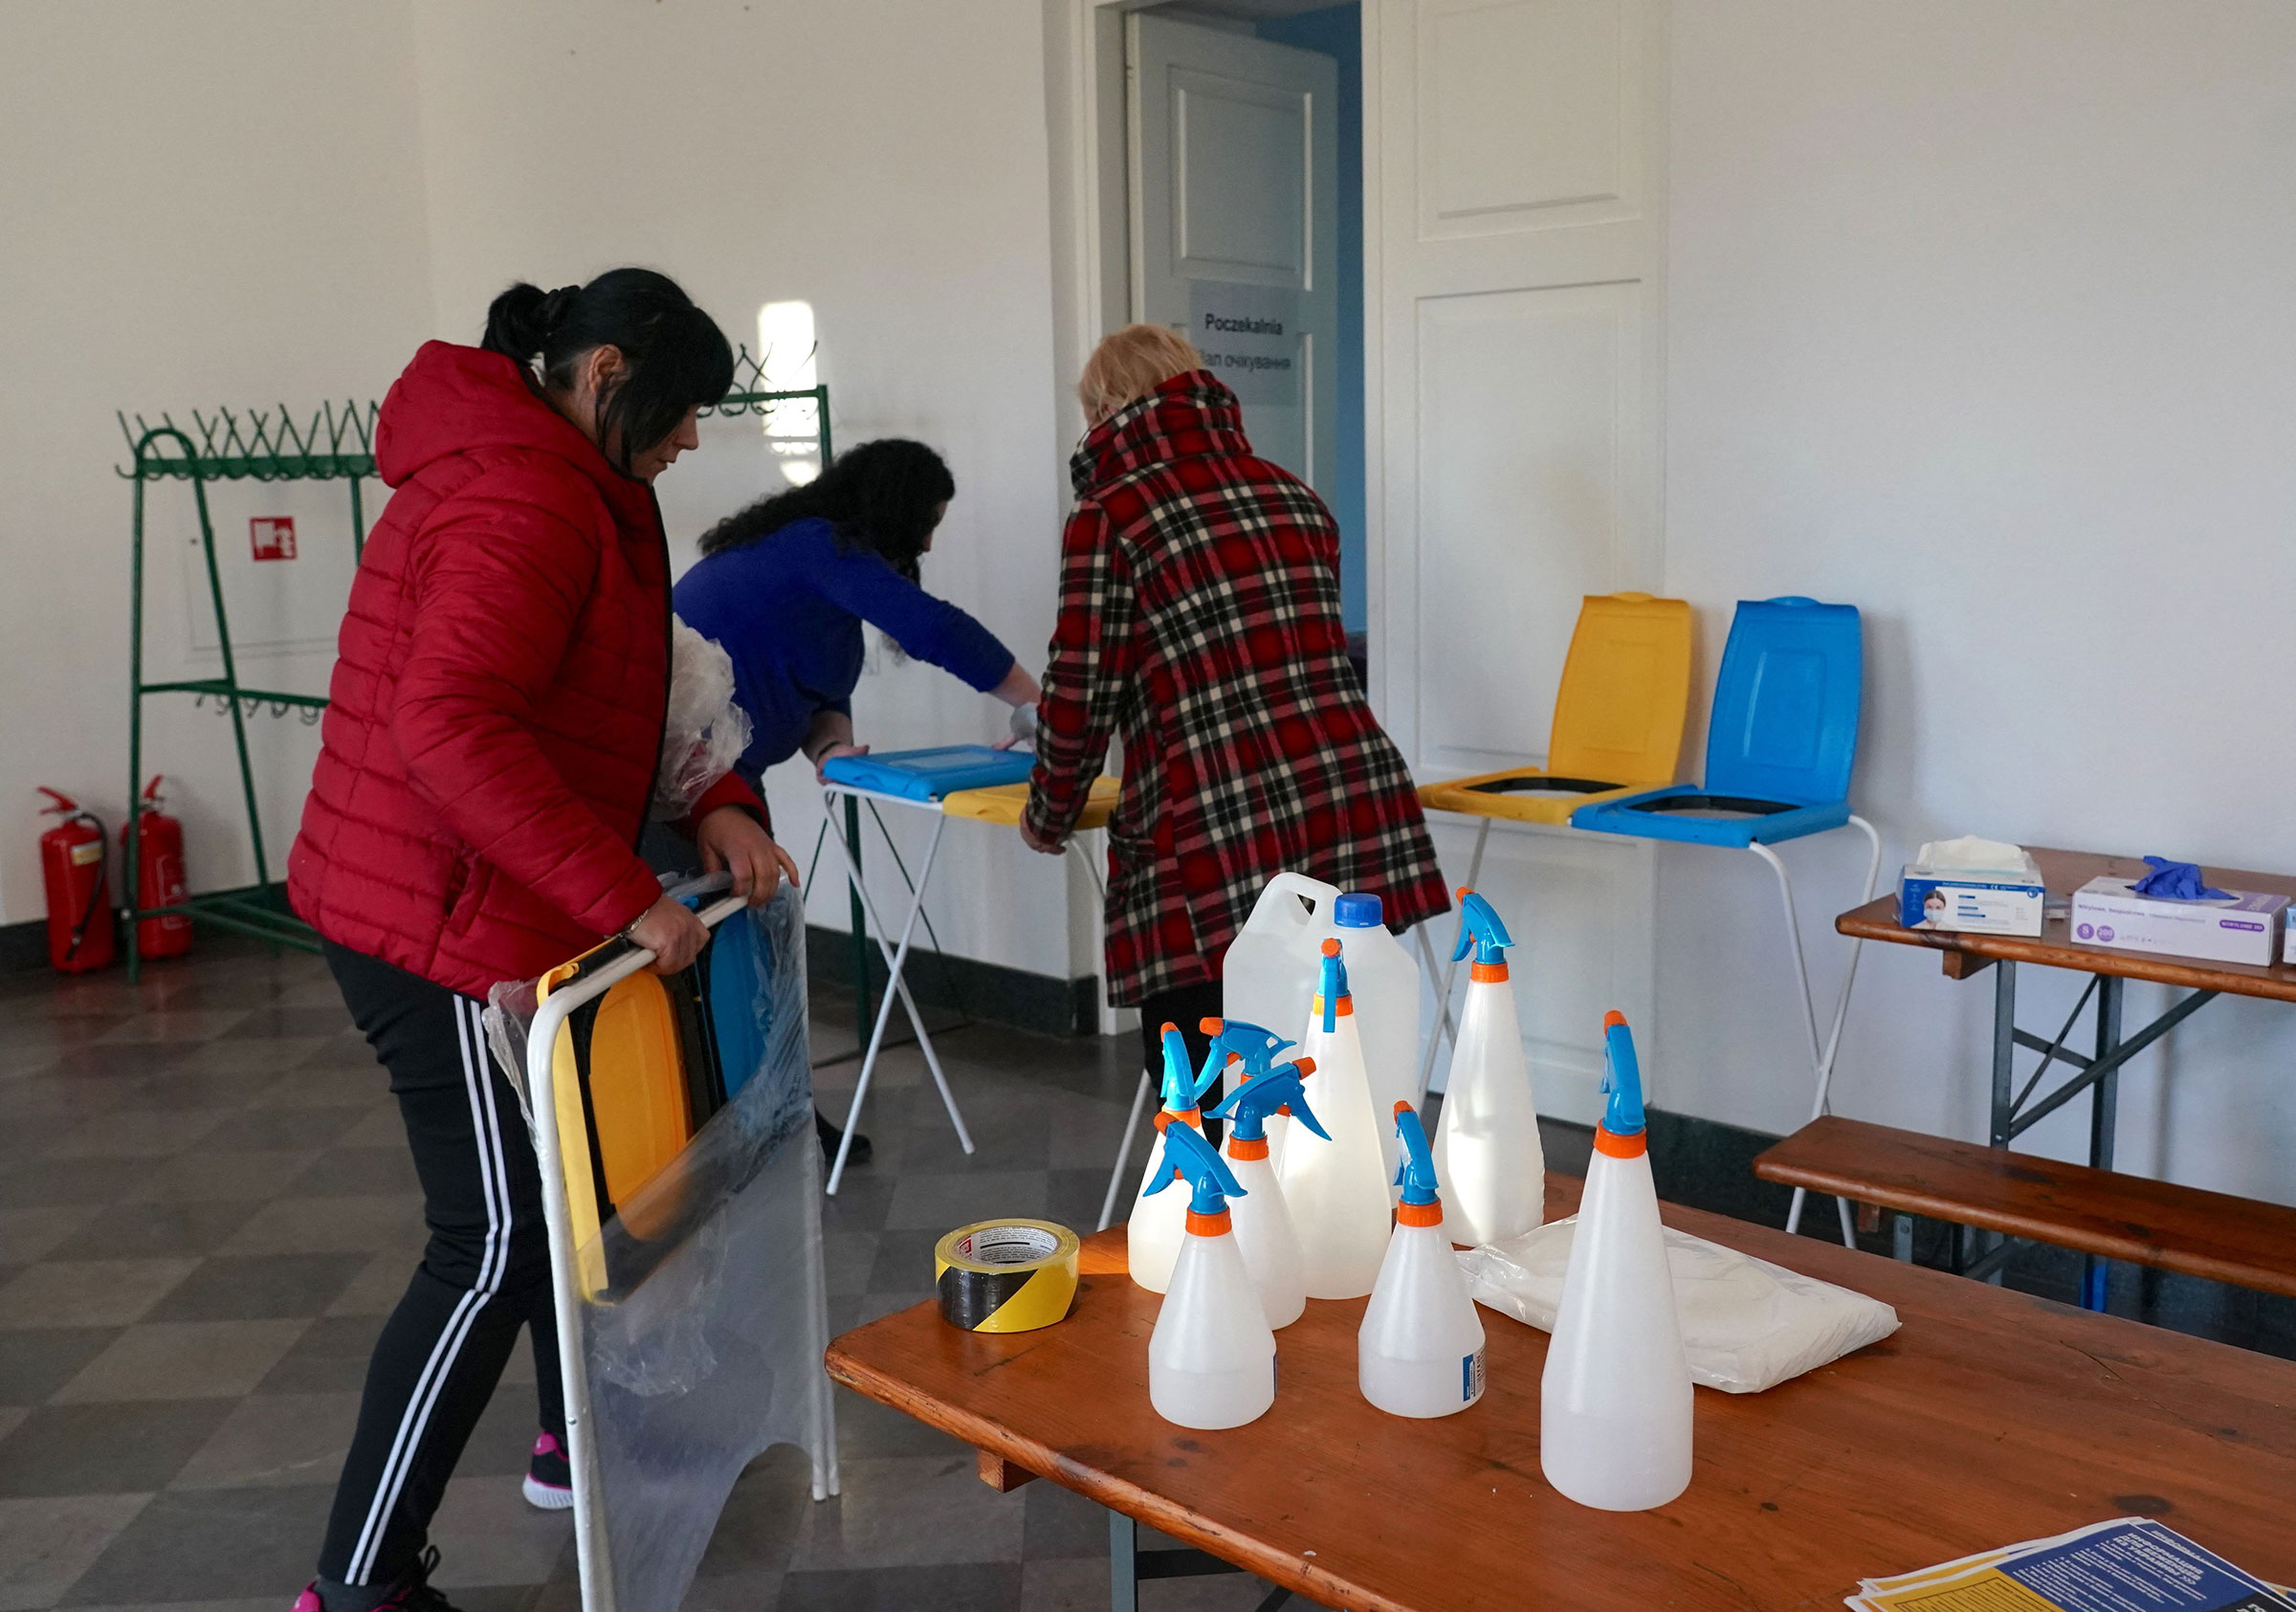 Staff make preparations at a reception centre for Ukrainian refugees in Dorohusk, Poland after Russian President Vladimir Putin authorized a military operation in Ukraine, on Feb. 24.